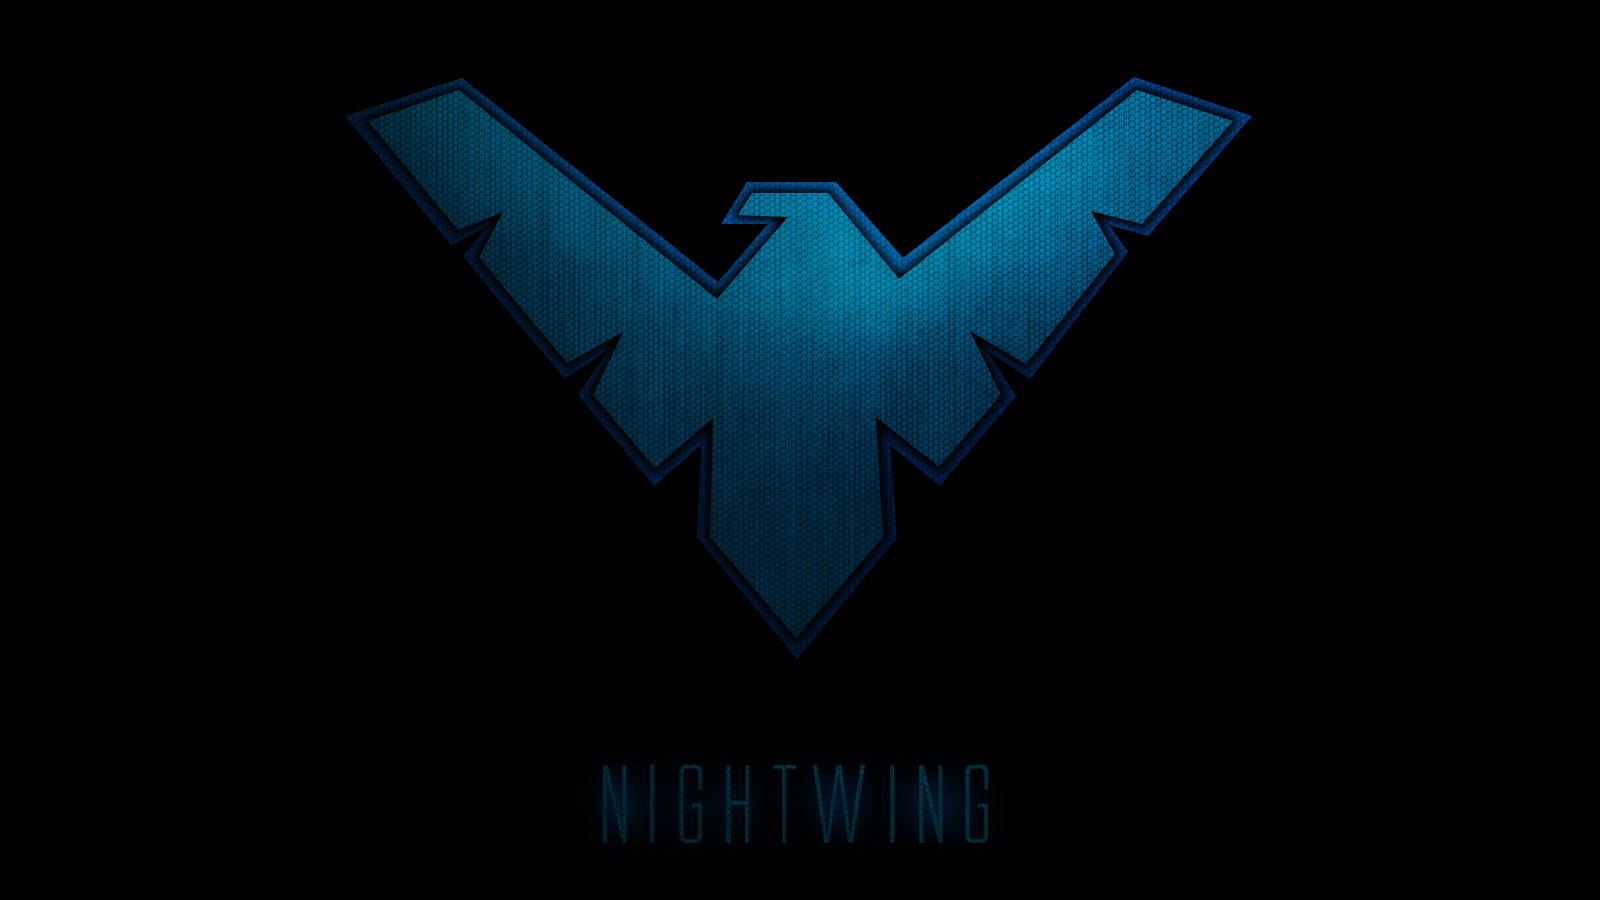 Nightwing by DeiNyght on